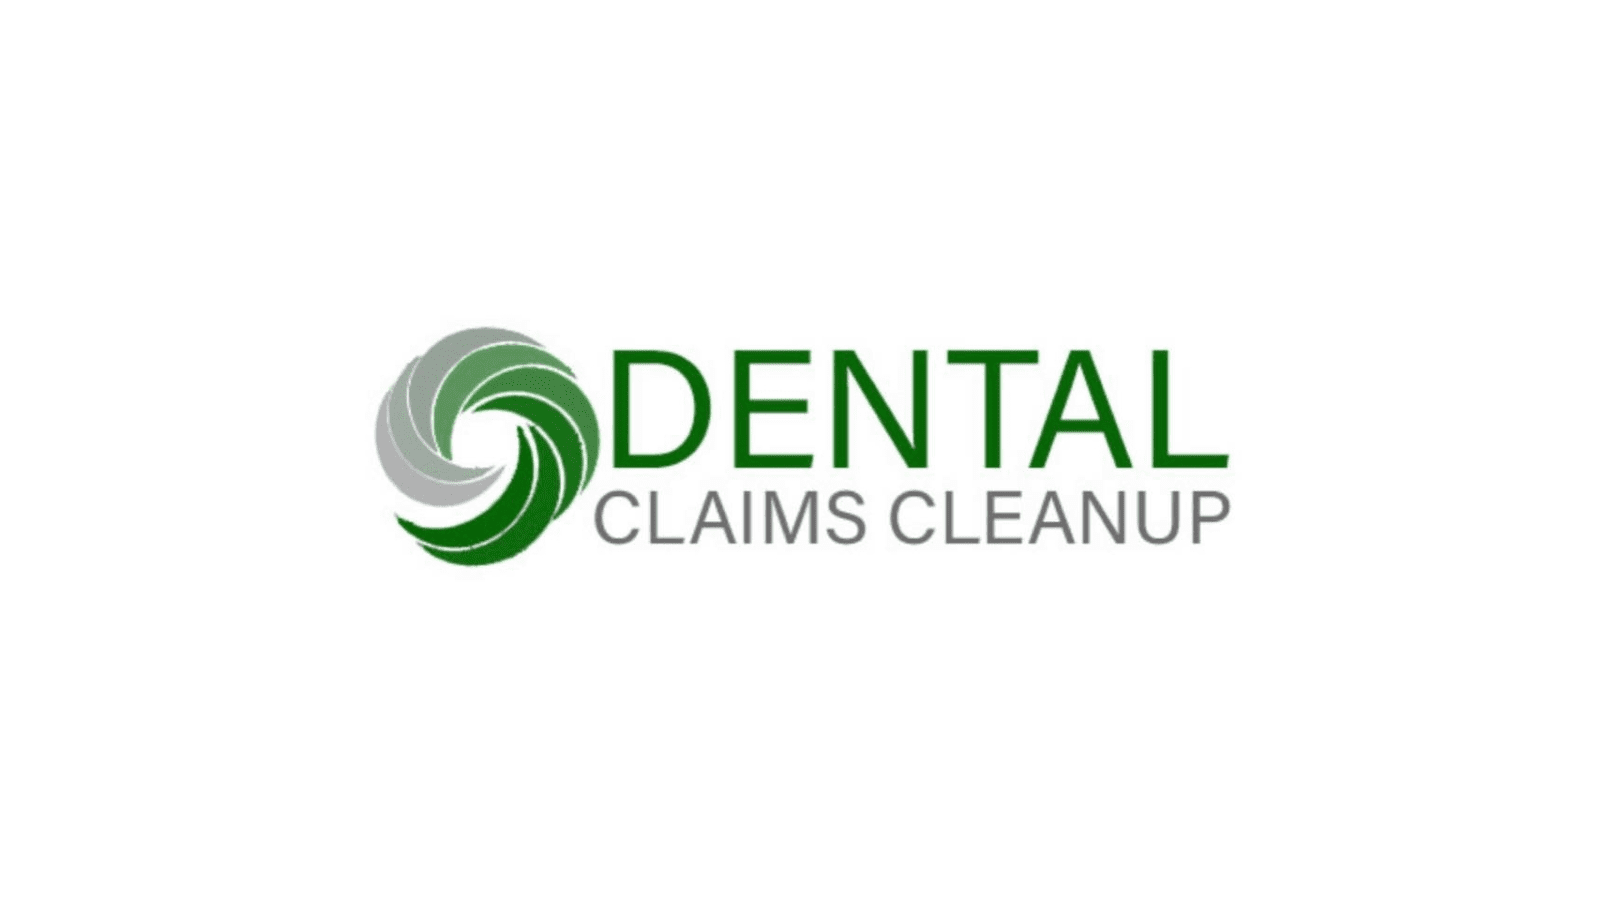 Dental claims cleanup